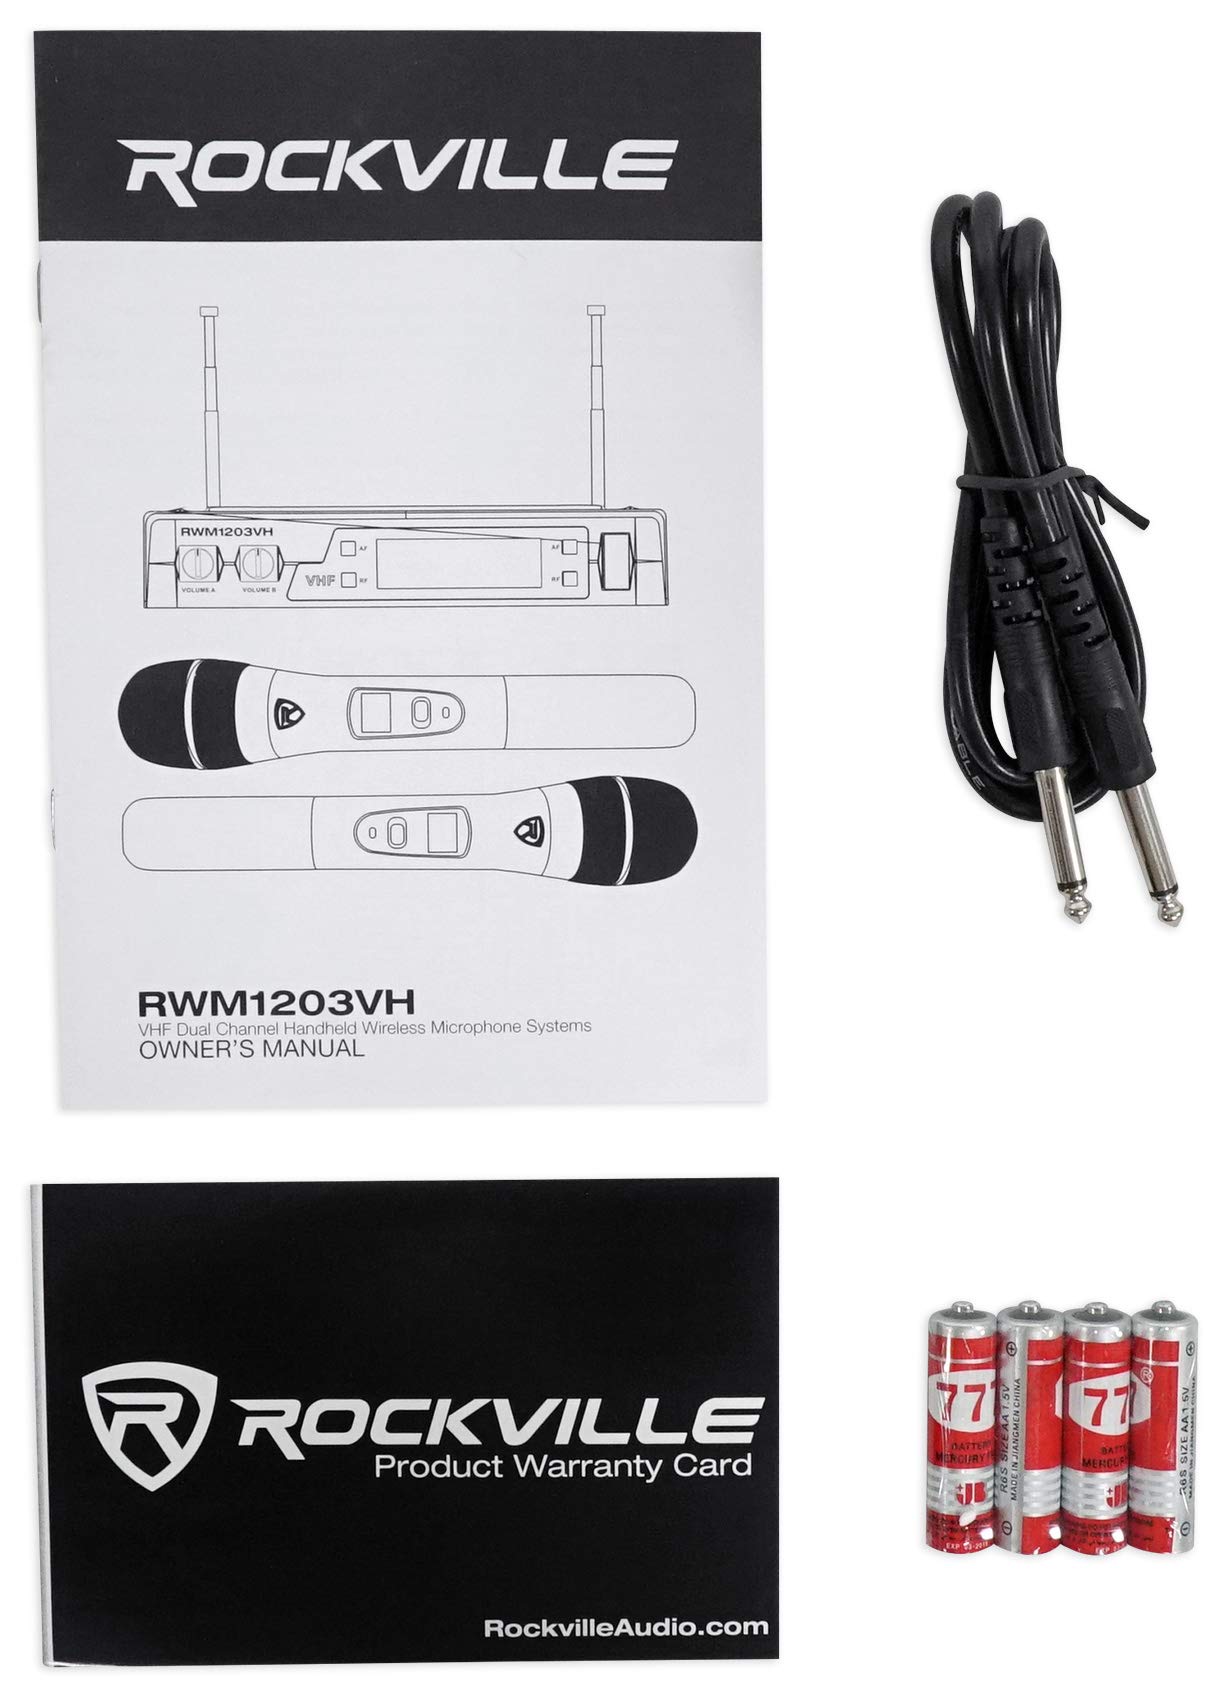 NYC Acoustics X-Tower Dual 4" Bluetooth Speaker w/Sound Activated LED's+Remote Bundle with Rockville RWM1203VH VHF Wireless Dual Handheld Microphone System/Digital Display